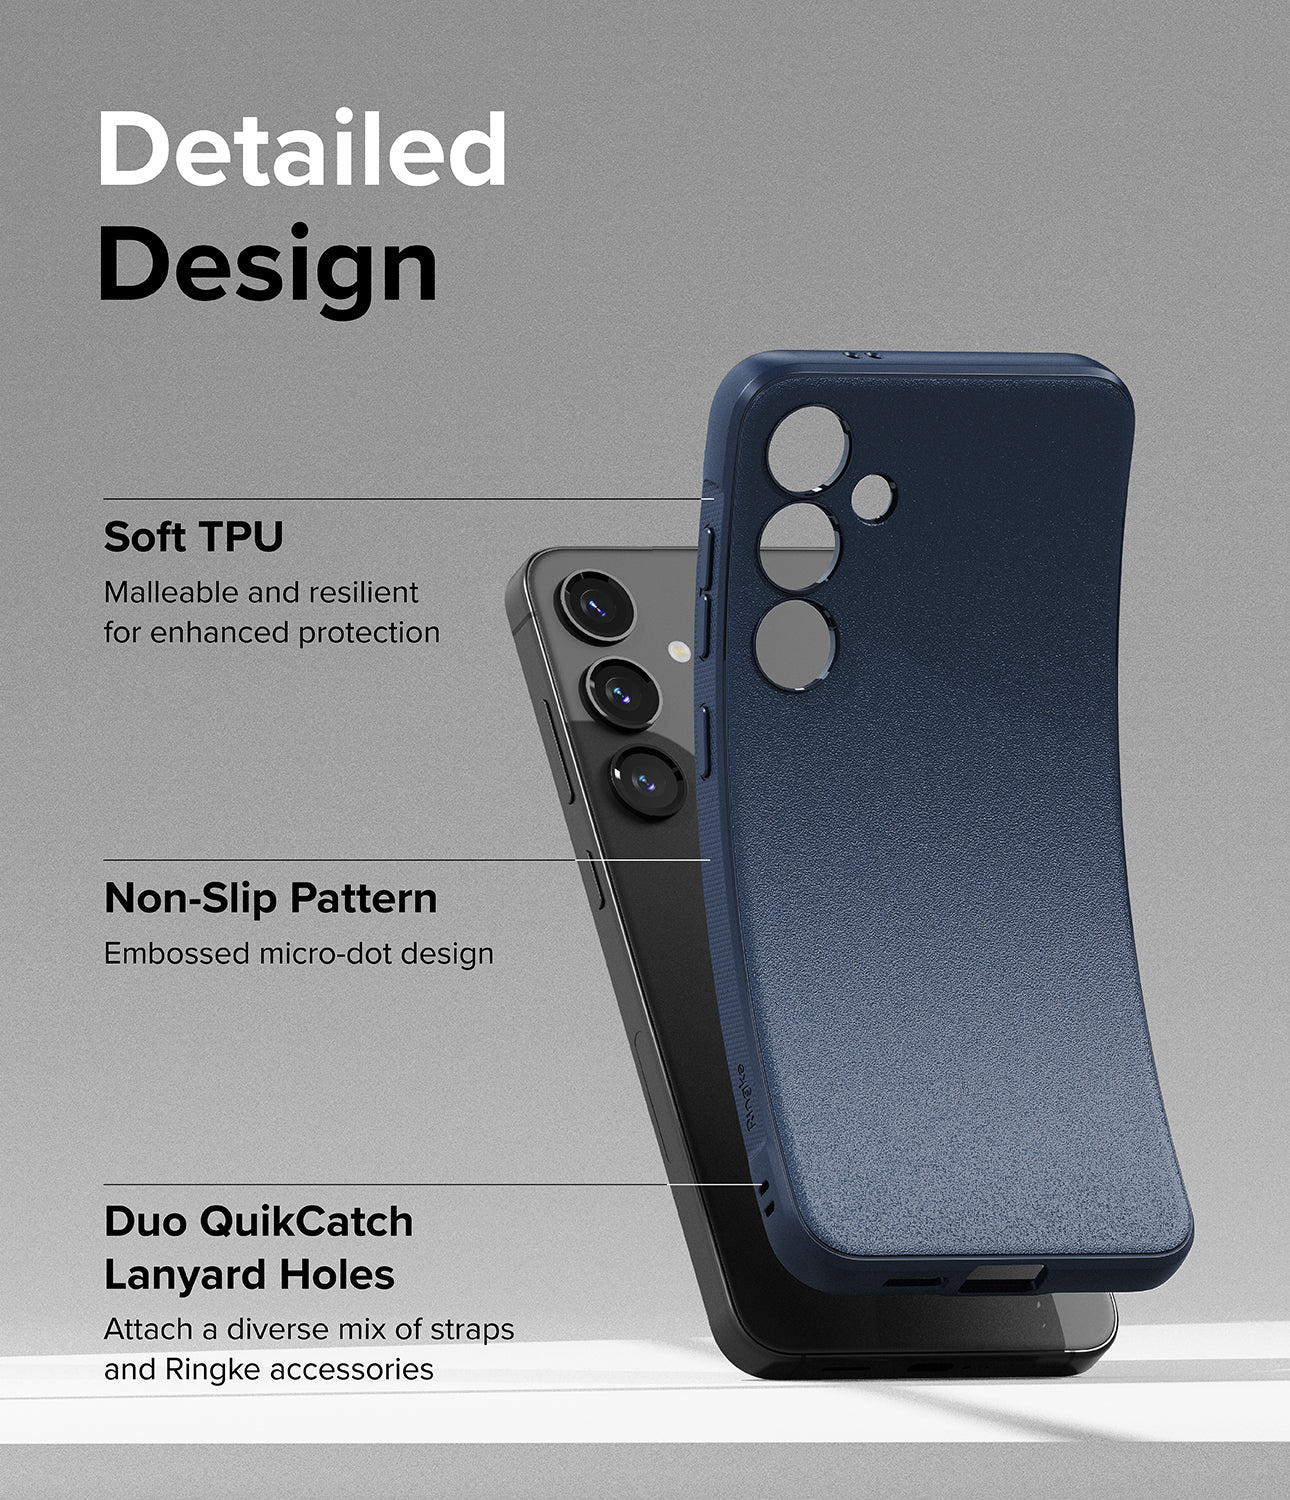 Galaxy S24 Case | Onyx - Navy - Detailed Design. Malleable and resilient for enhanced protection with Soft TPU. Embossed micro-dot design with Non-Slip Pattern. Attach a diverse mix of straps and Ringke accessories with Duo QuikCatch Lanyard Holes.